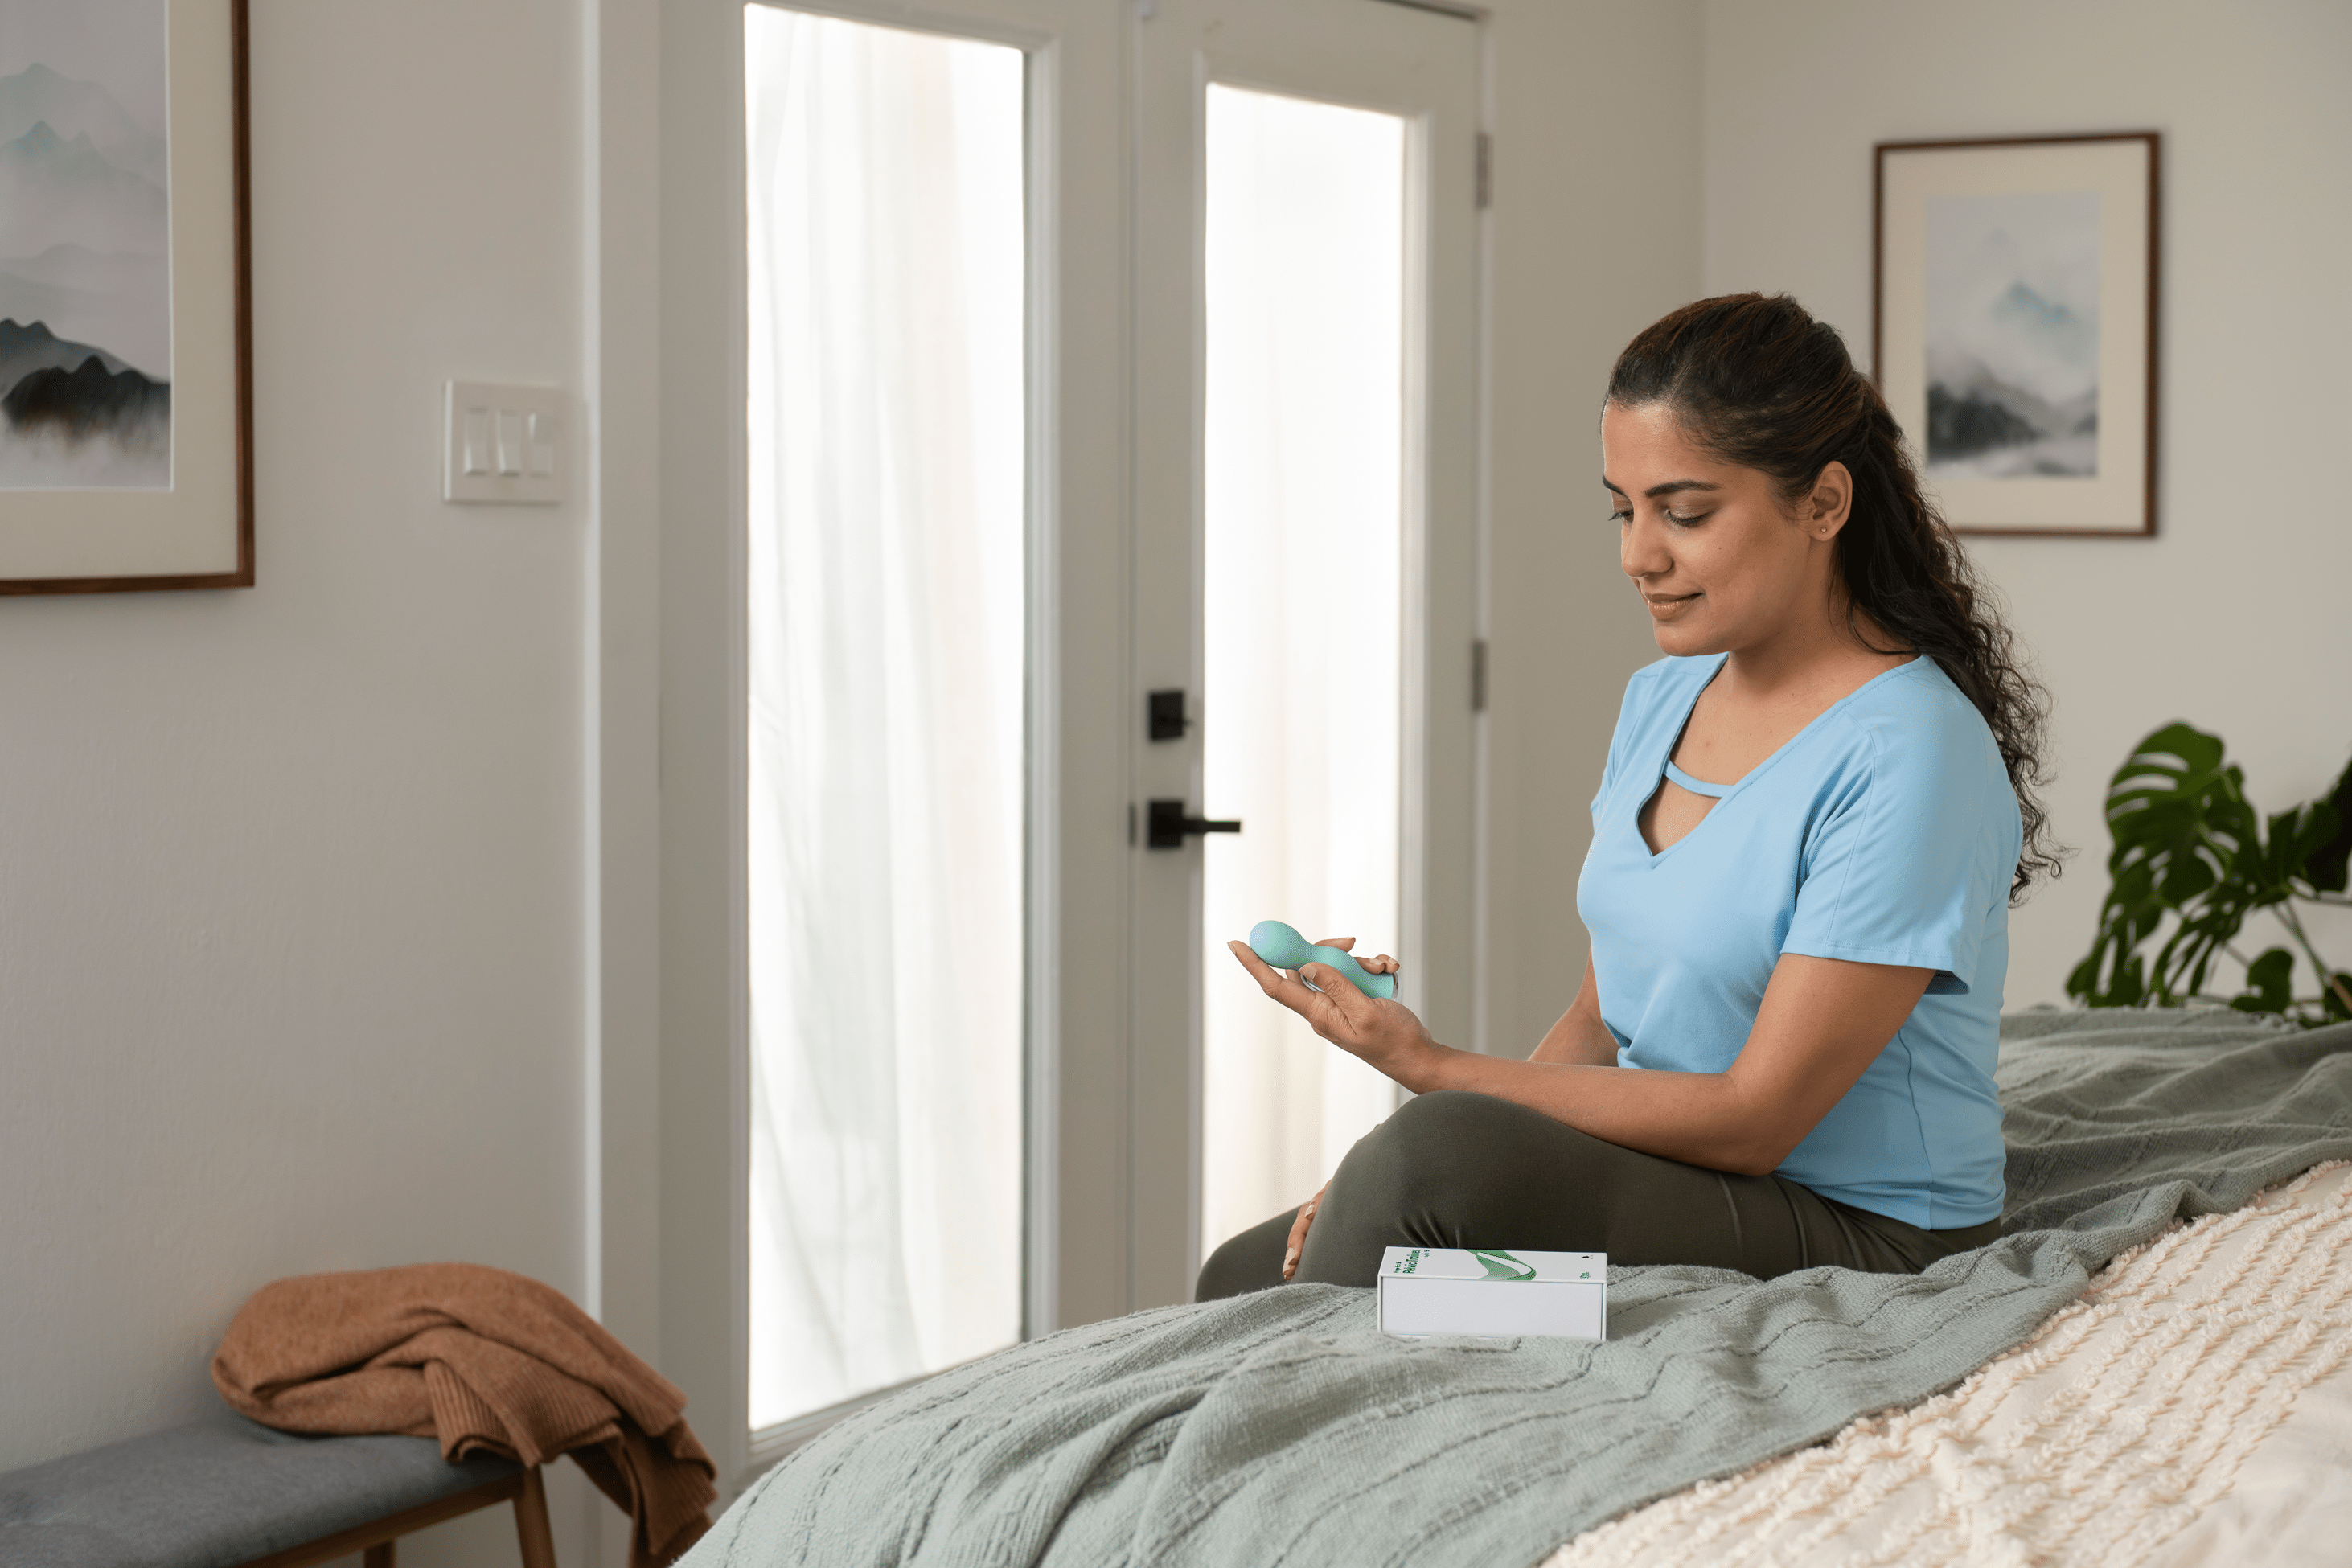 Image of a woman sitting on the edge of a bed, holding a pelvic trainer in her hand